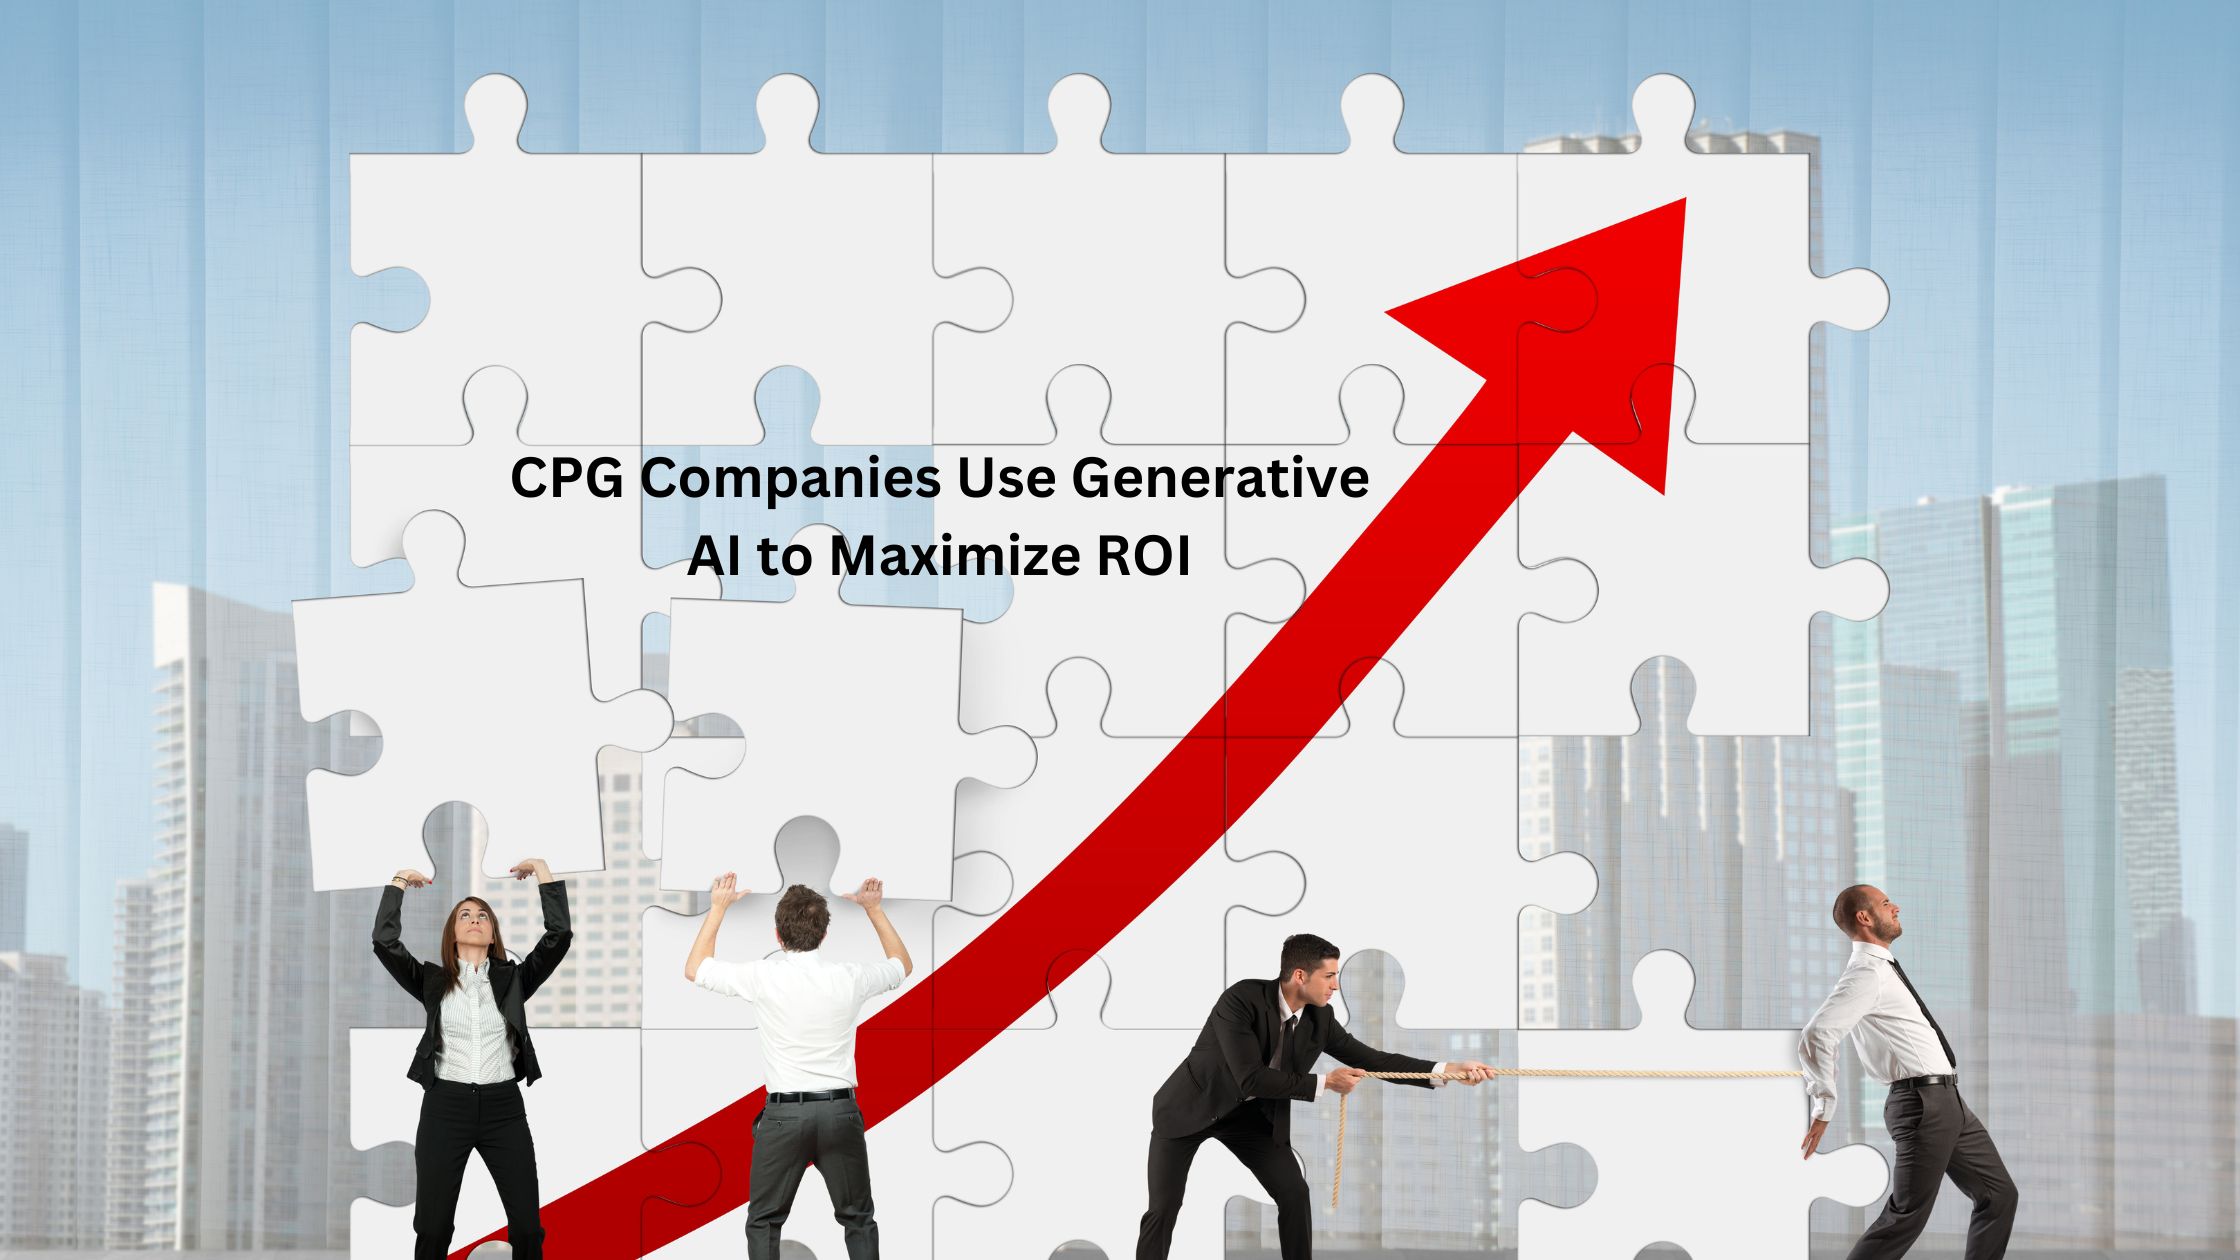 How Can CPG Companies Use Generative AI to Maximize ROI?